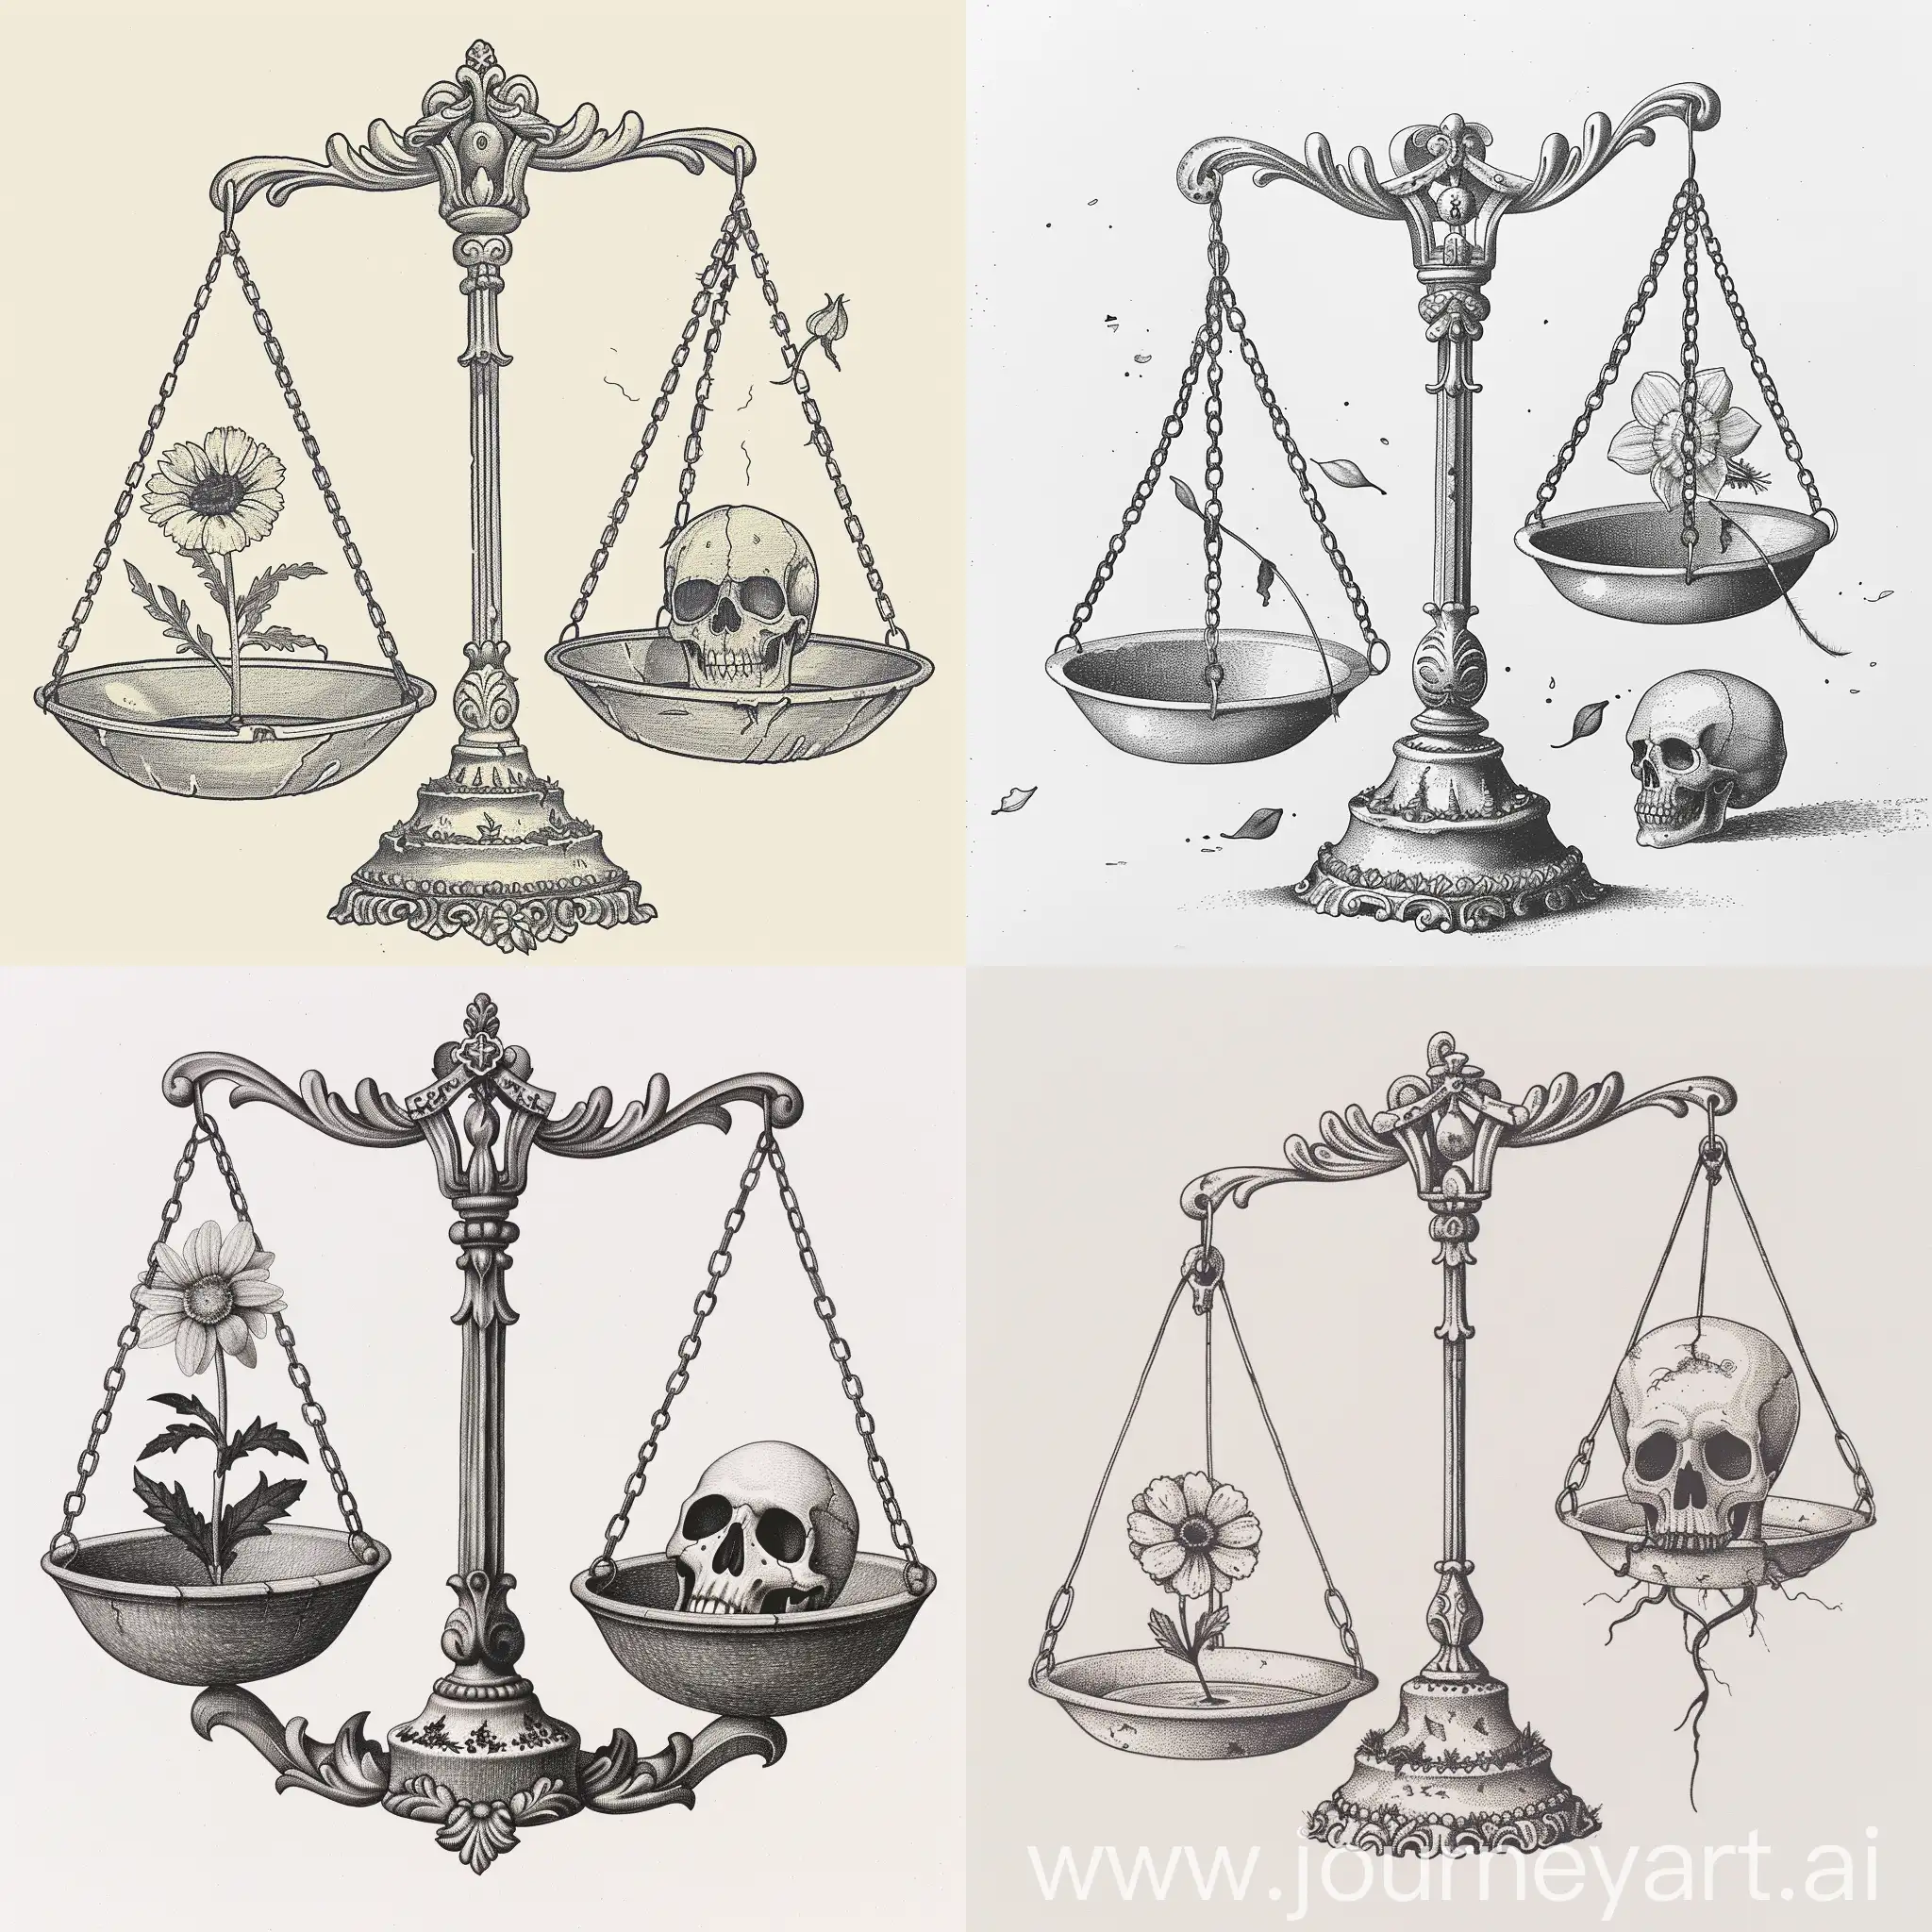 Balance-of-Life-and-Death-Scales-with-Flower-and-Skull-Symbols